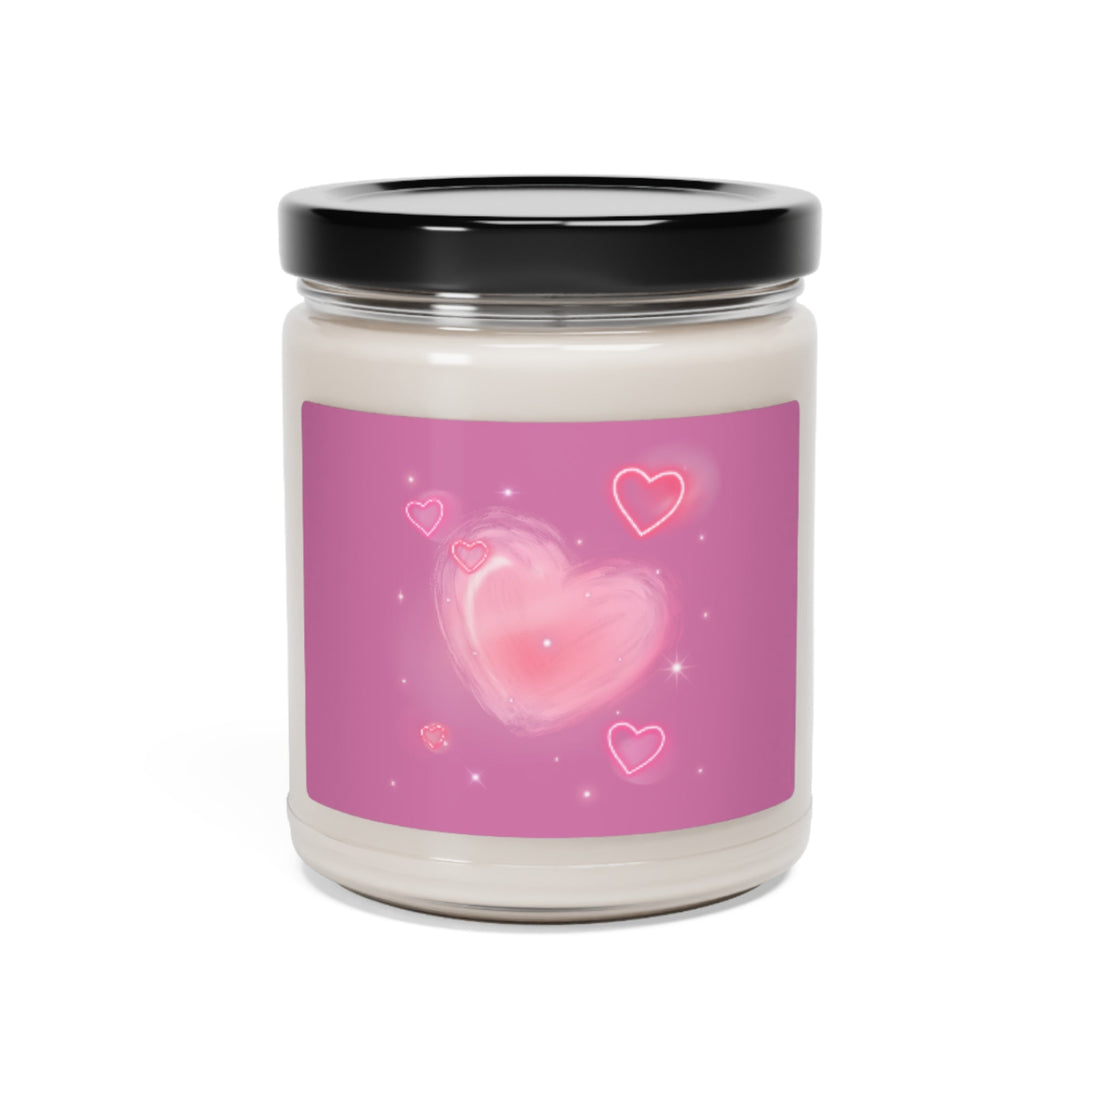 All Hearts for You Scented Soy Candle, 9oz - Home Decor - Positively Sassy - All Hearts for You Scented Soy Candle, 9oz